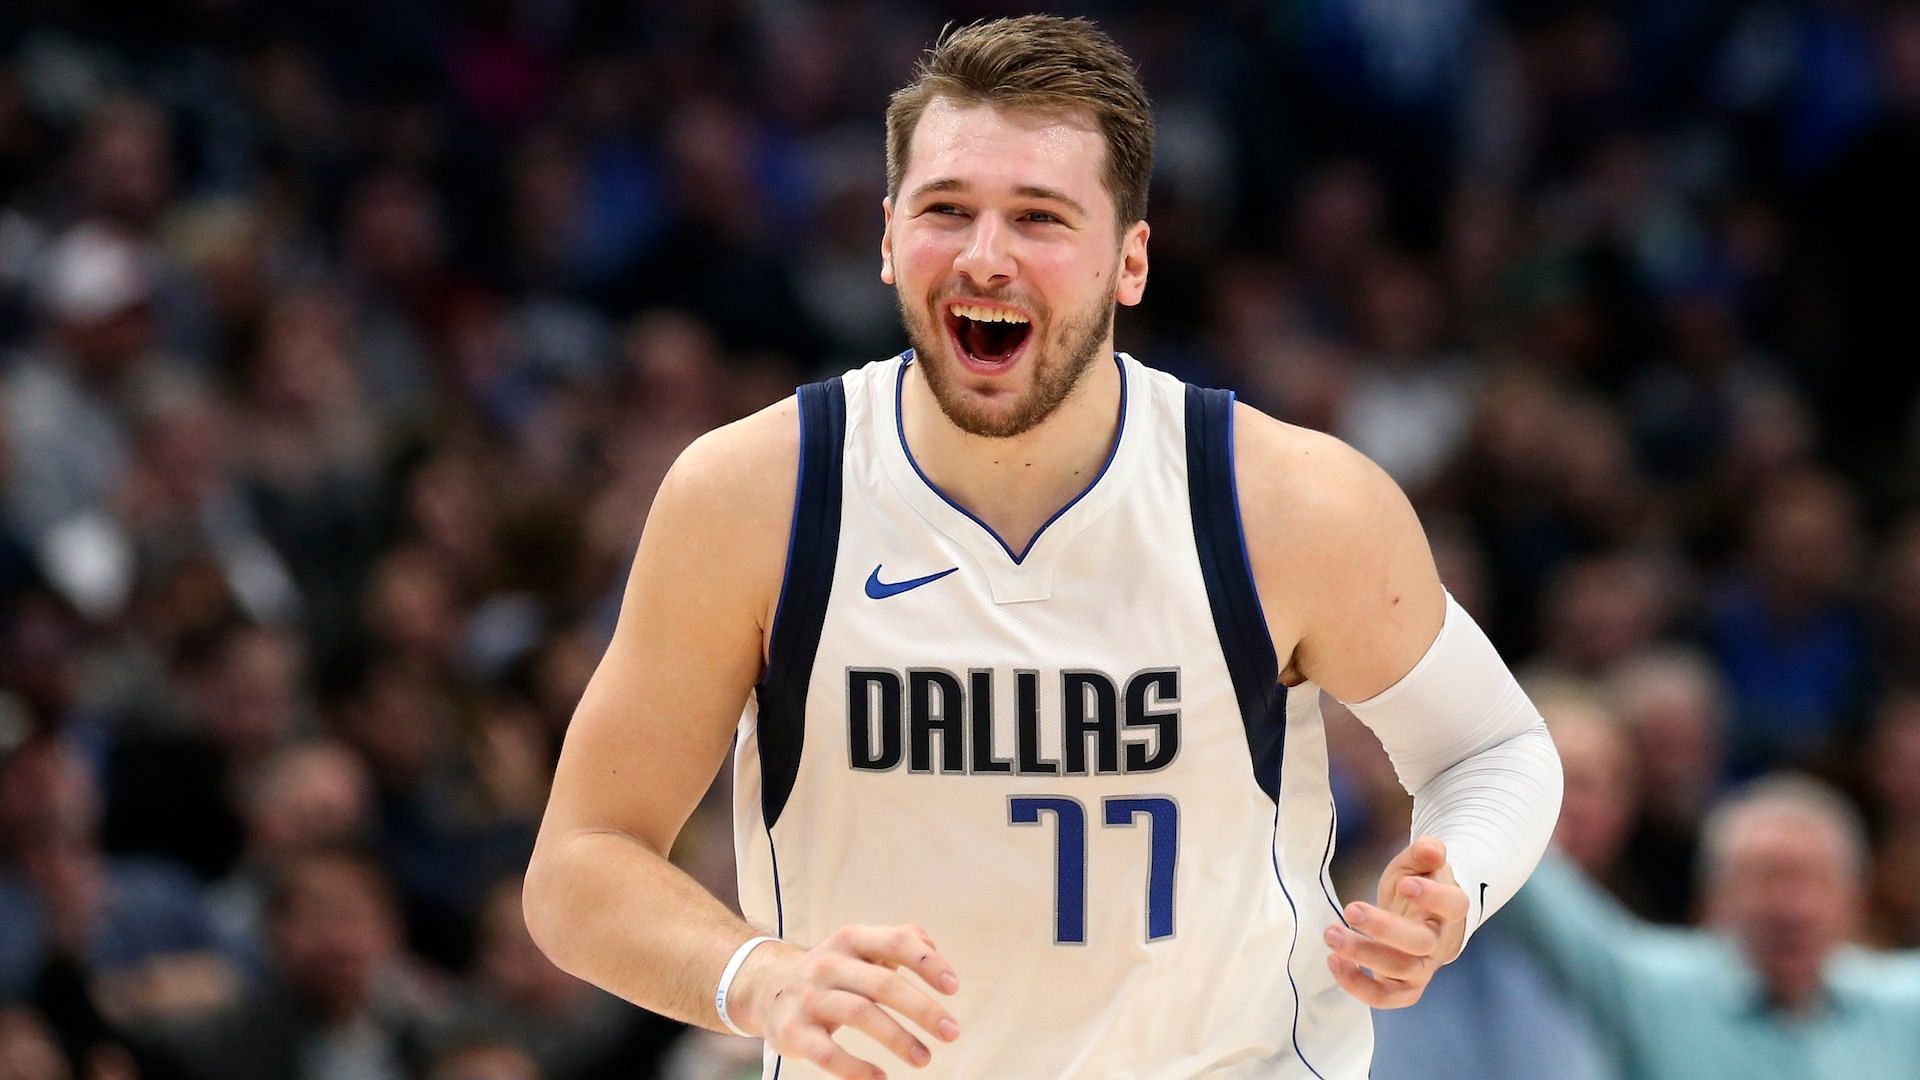 Luka Doncic just asked former NBA player and ESPN analyst Richard Jefferson to post something on Tik Tok. [Photo: NBA.com]